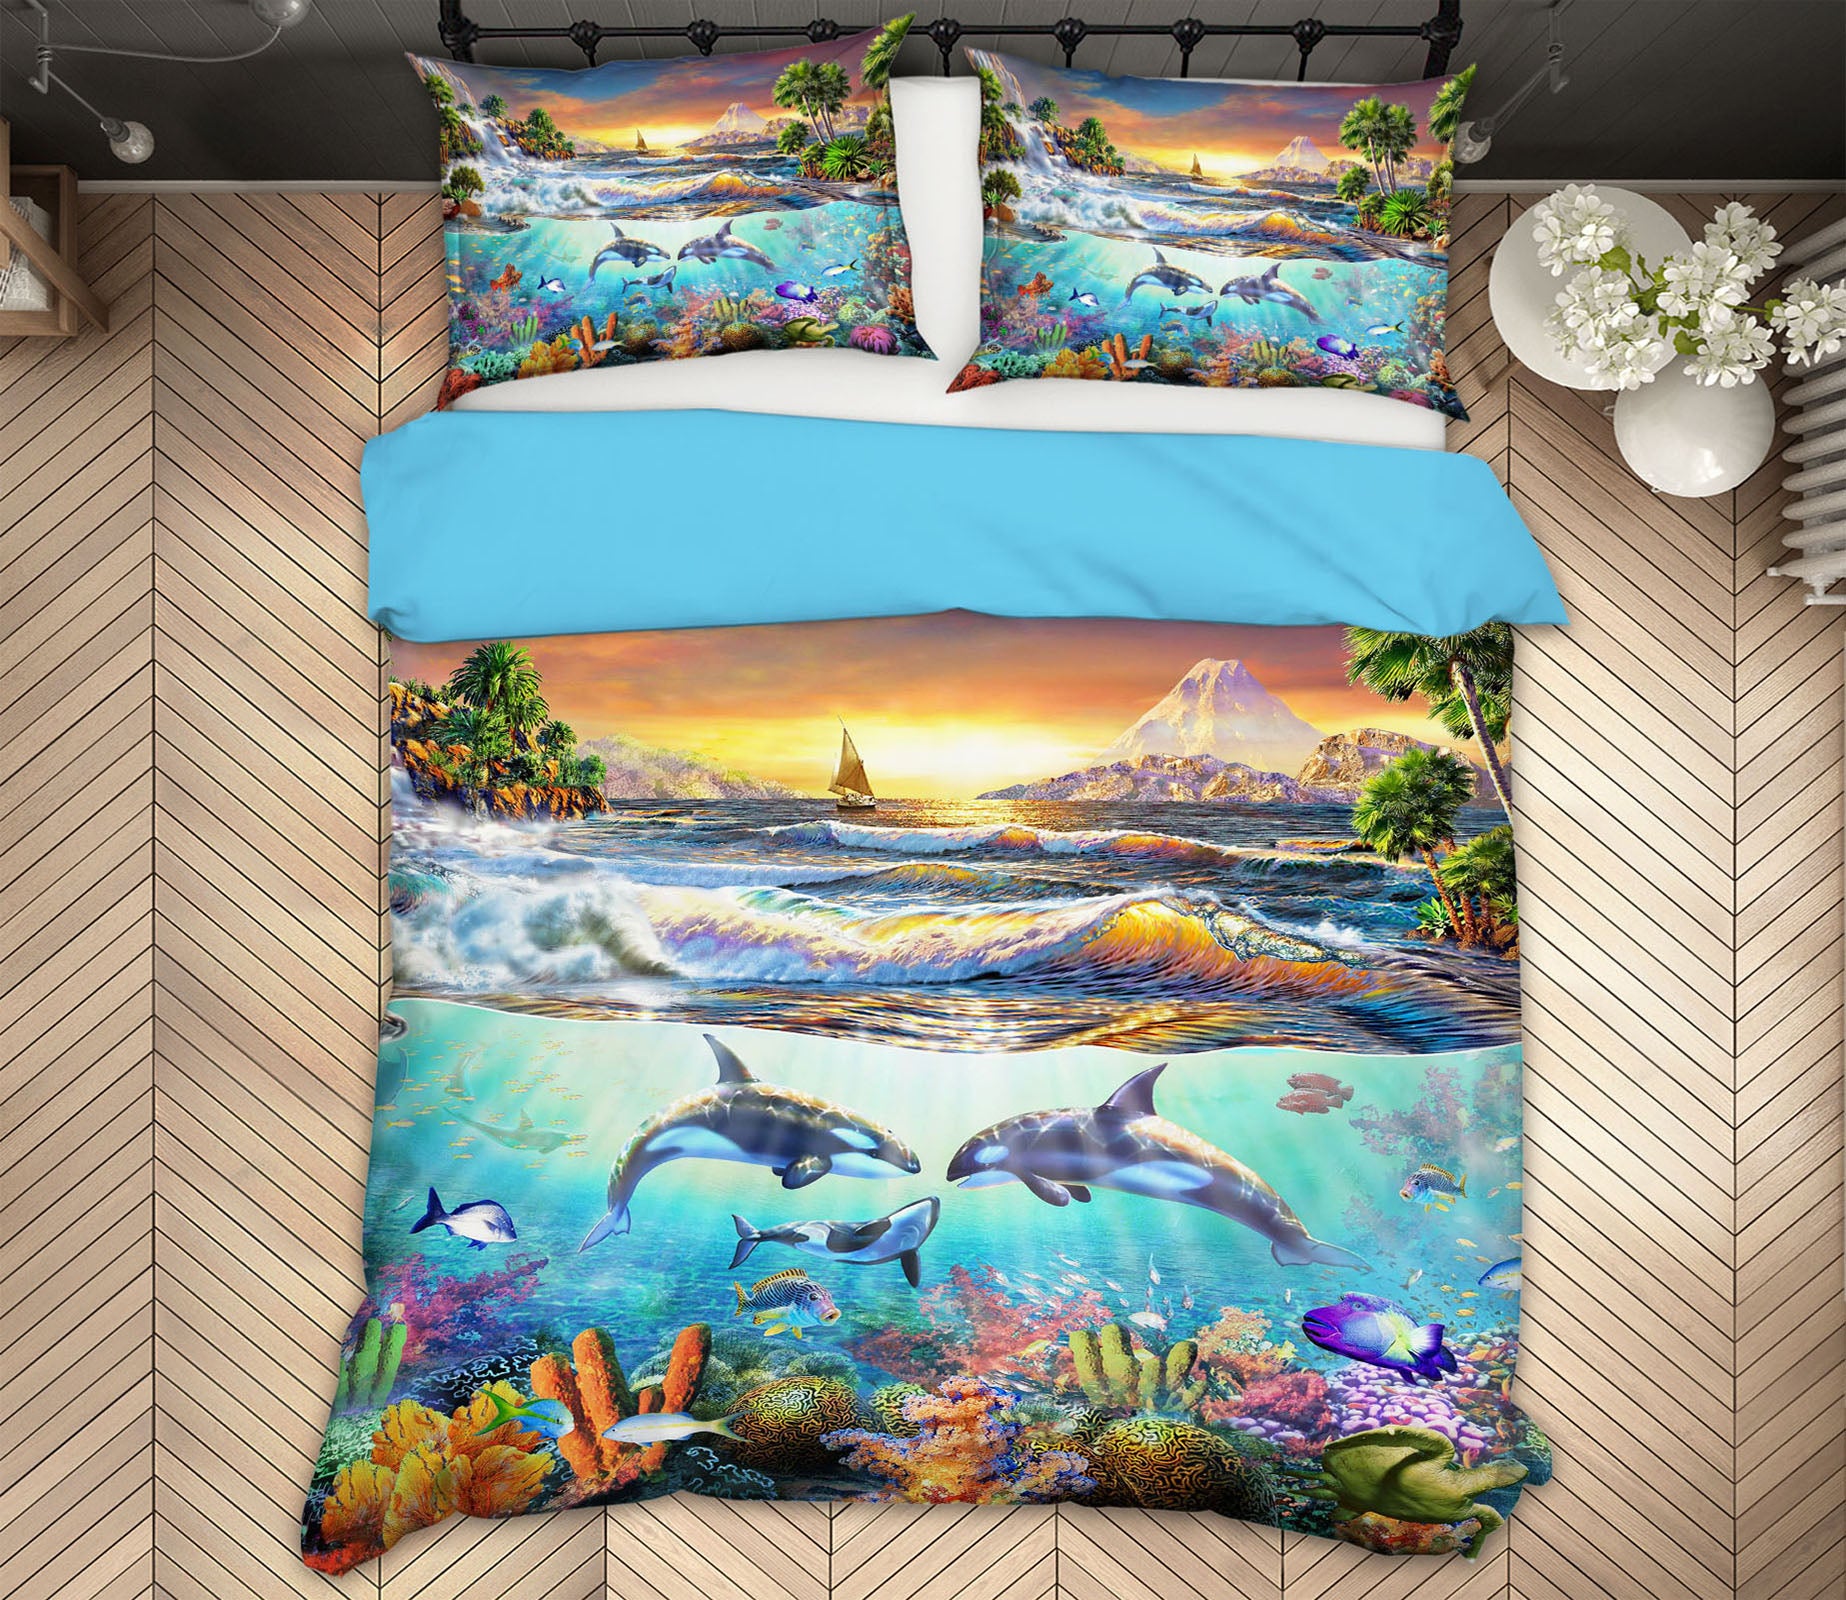 3D Dolphin Play 2104 Adrian Chesterman Bedding Bed Pillowcases Quilt